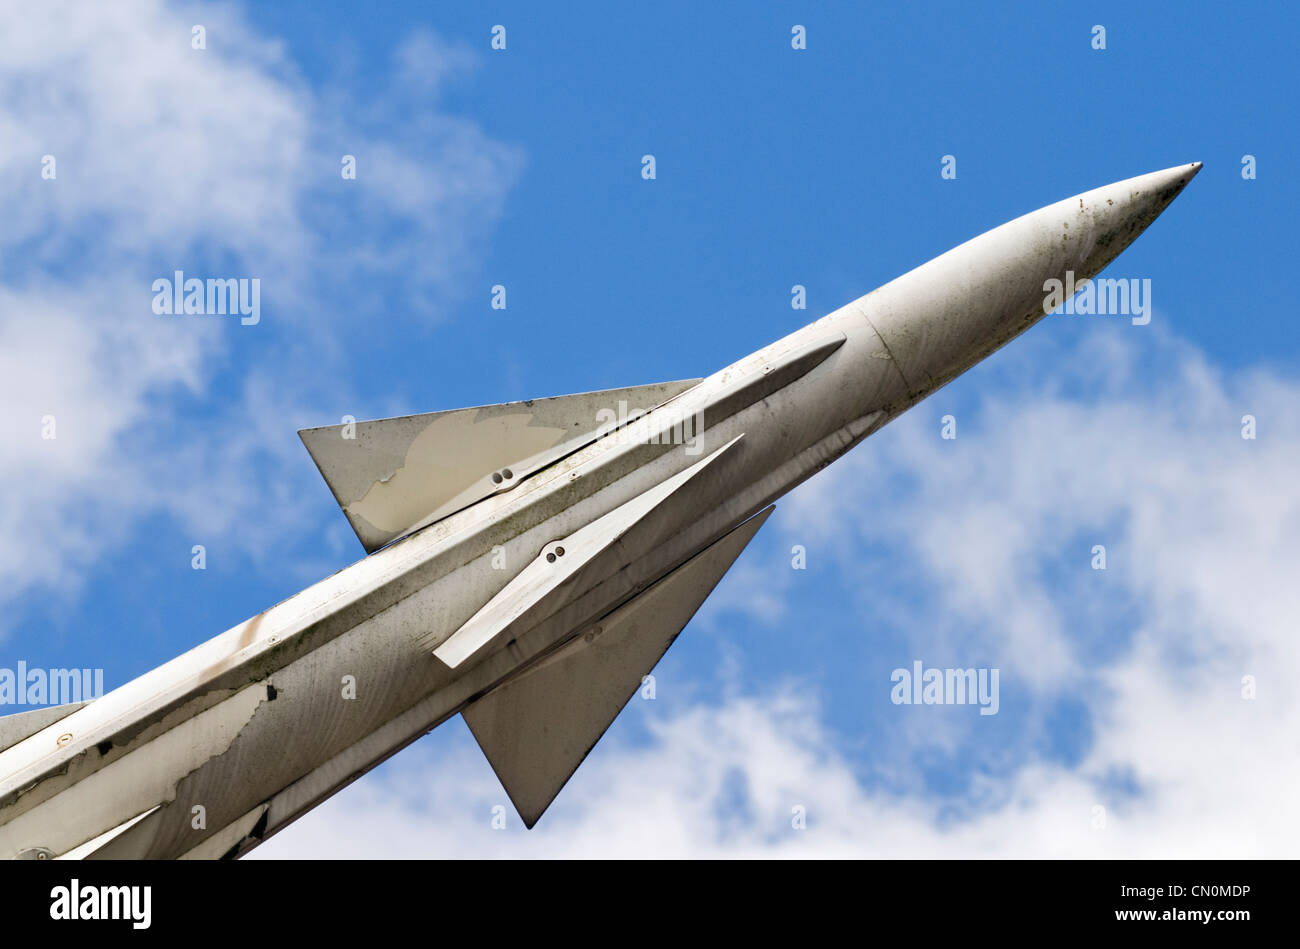 A missile in launch position Stock Photo